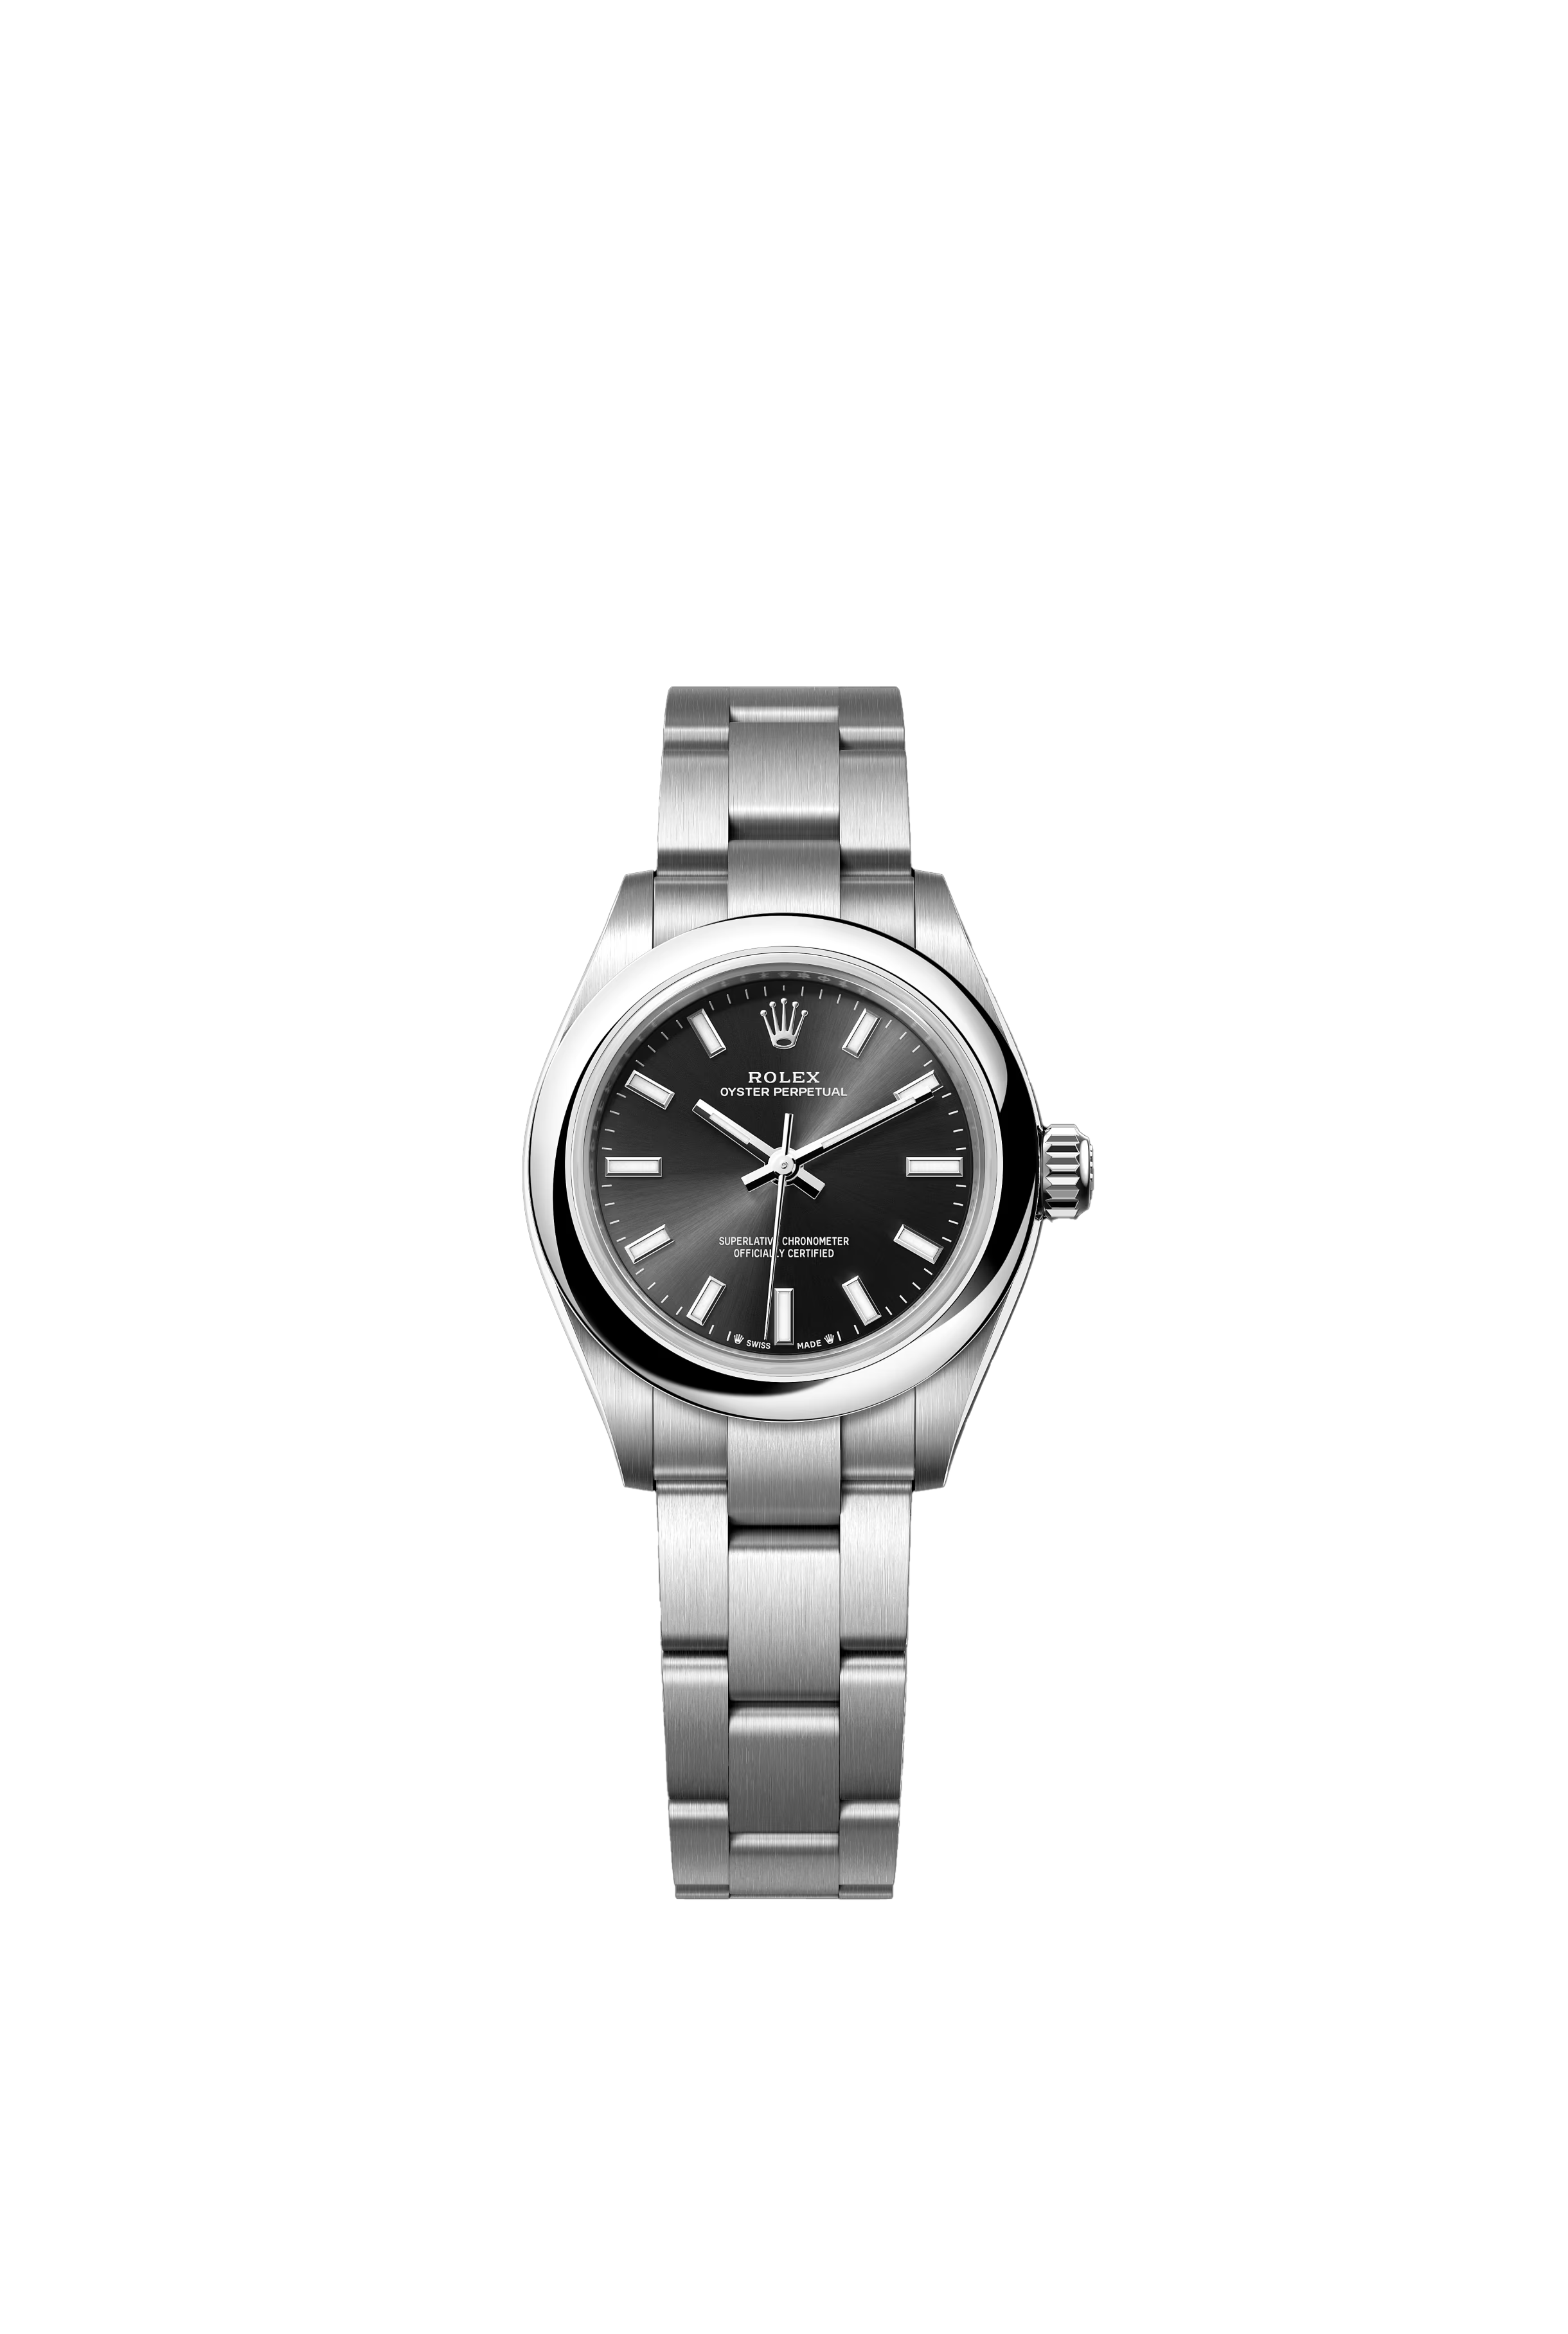 Rolex Oyster Perpetual 28 Oyster, 28 mm, Oystersteel Reference 276200